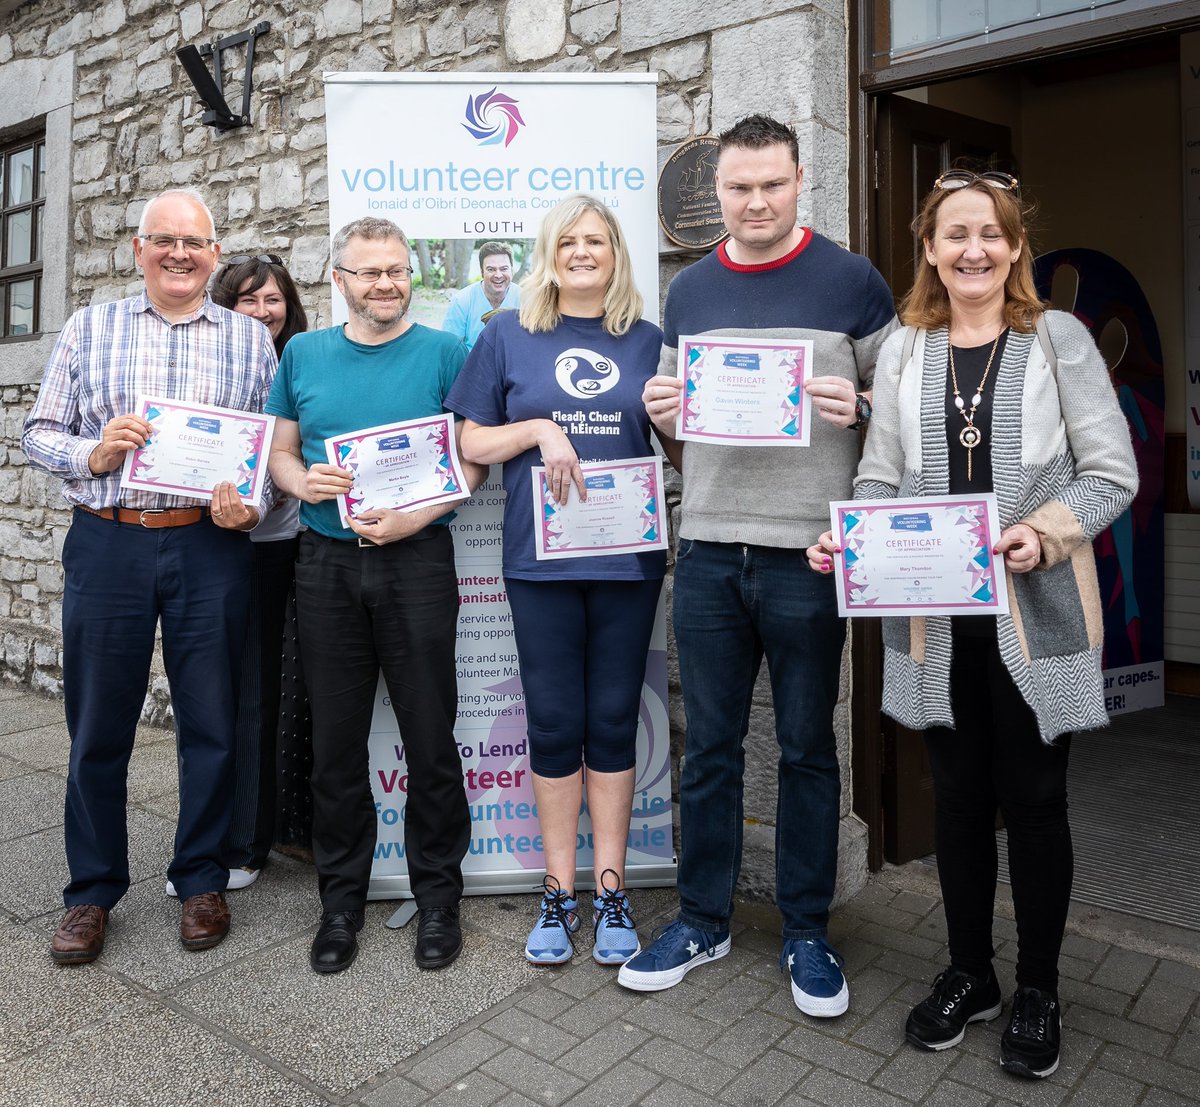 So we had the most amazing National Volunteering Week last week. And it was all thanks to the committed and inspiring team of volunteers who help us out every week of the year. Take a bow lads and lassies! #NVW2019 #WhyIVolunteer #LouthChat